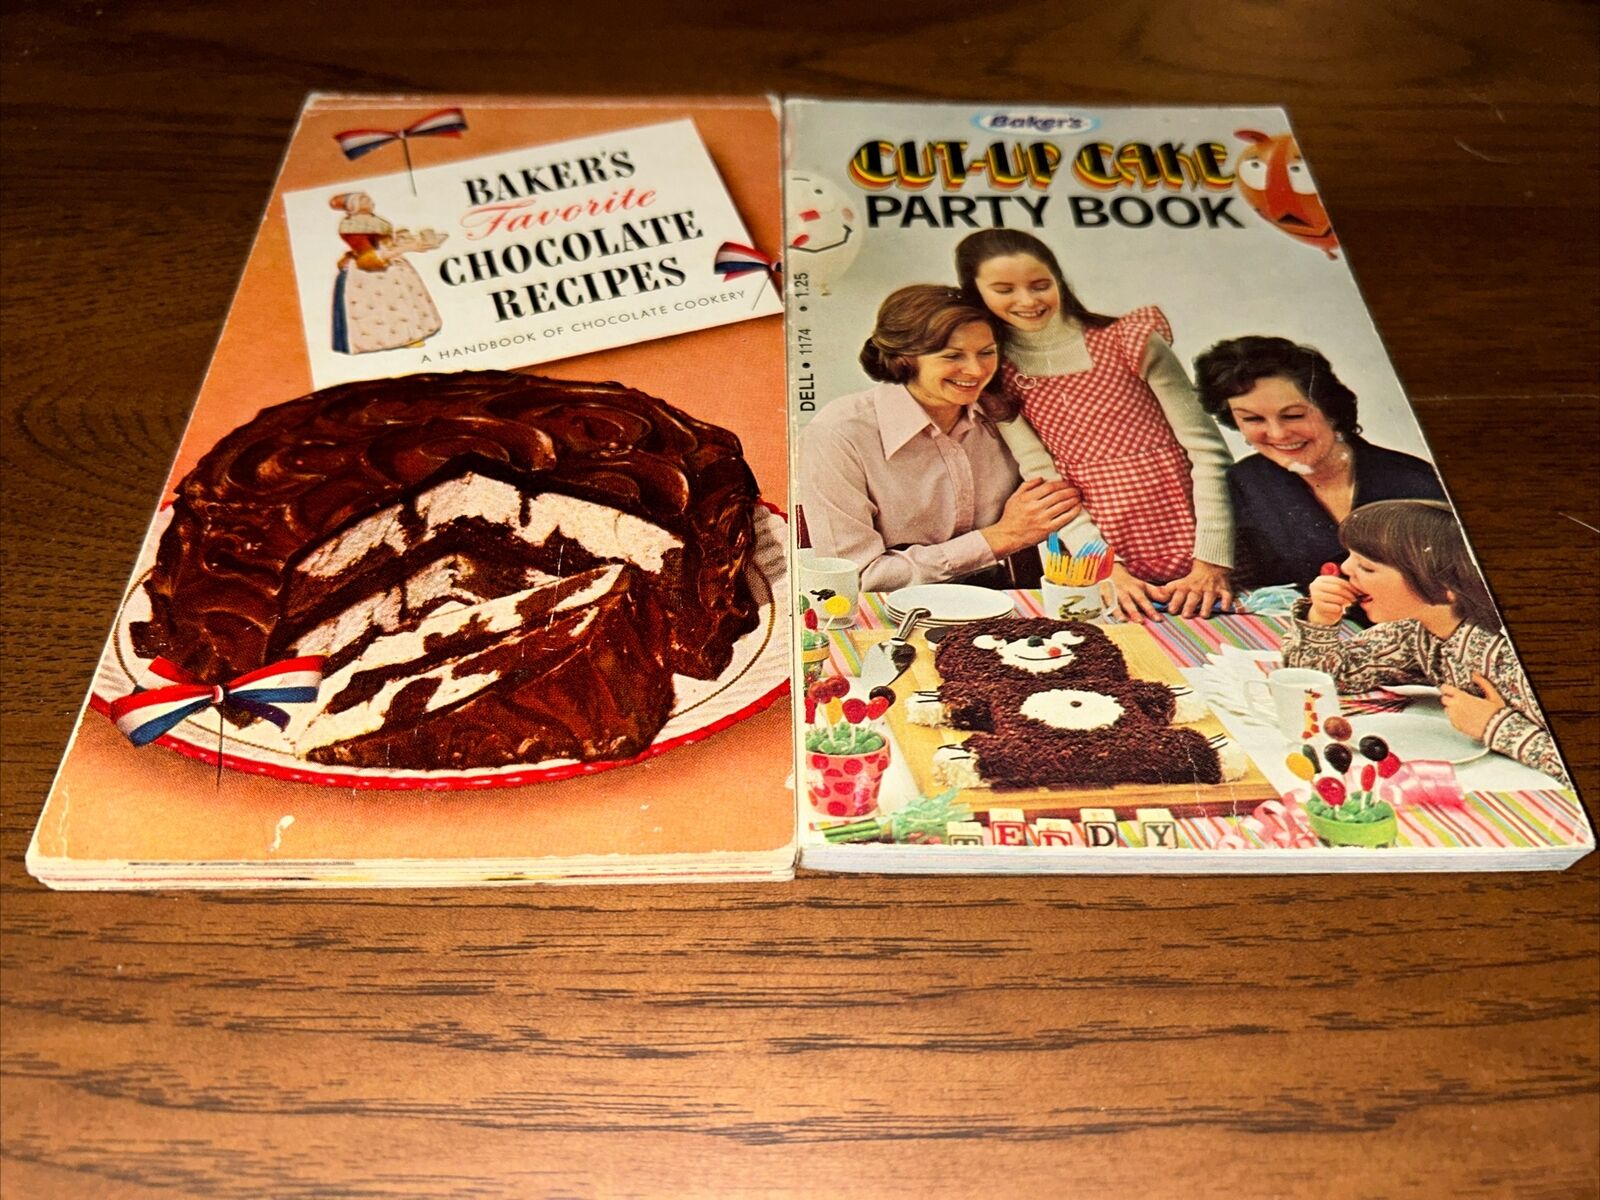 2 Vintage BAKER\'S Favorite Chocolate Recipes + Cut Up Cake Party Book Cookbook